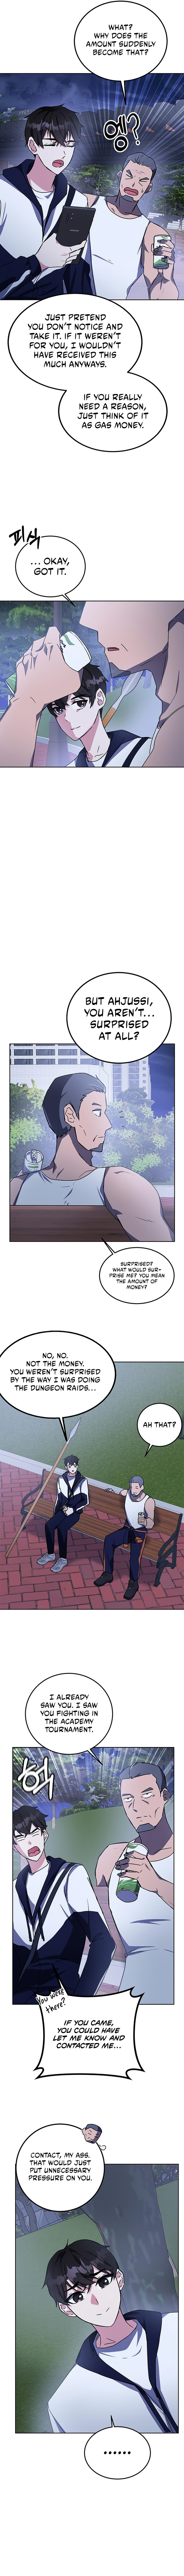 Transcension Academy - Chapter 19 Page 10